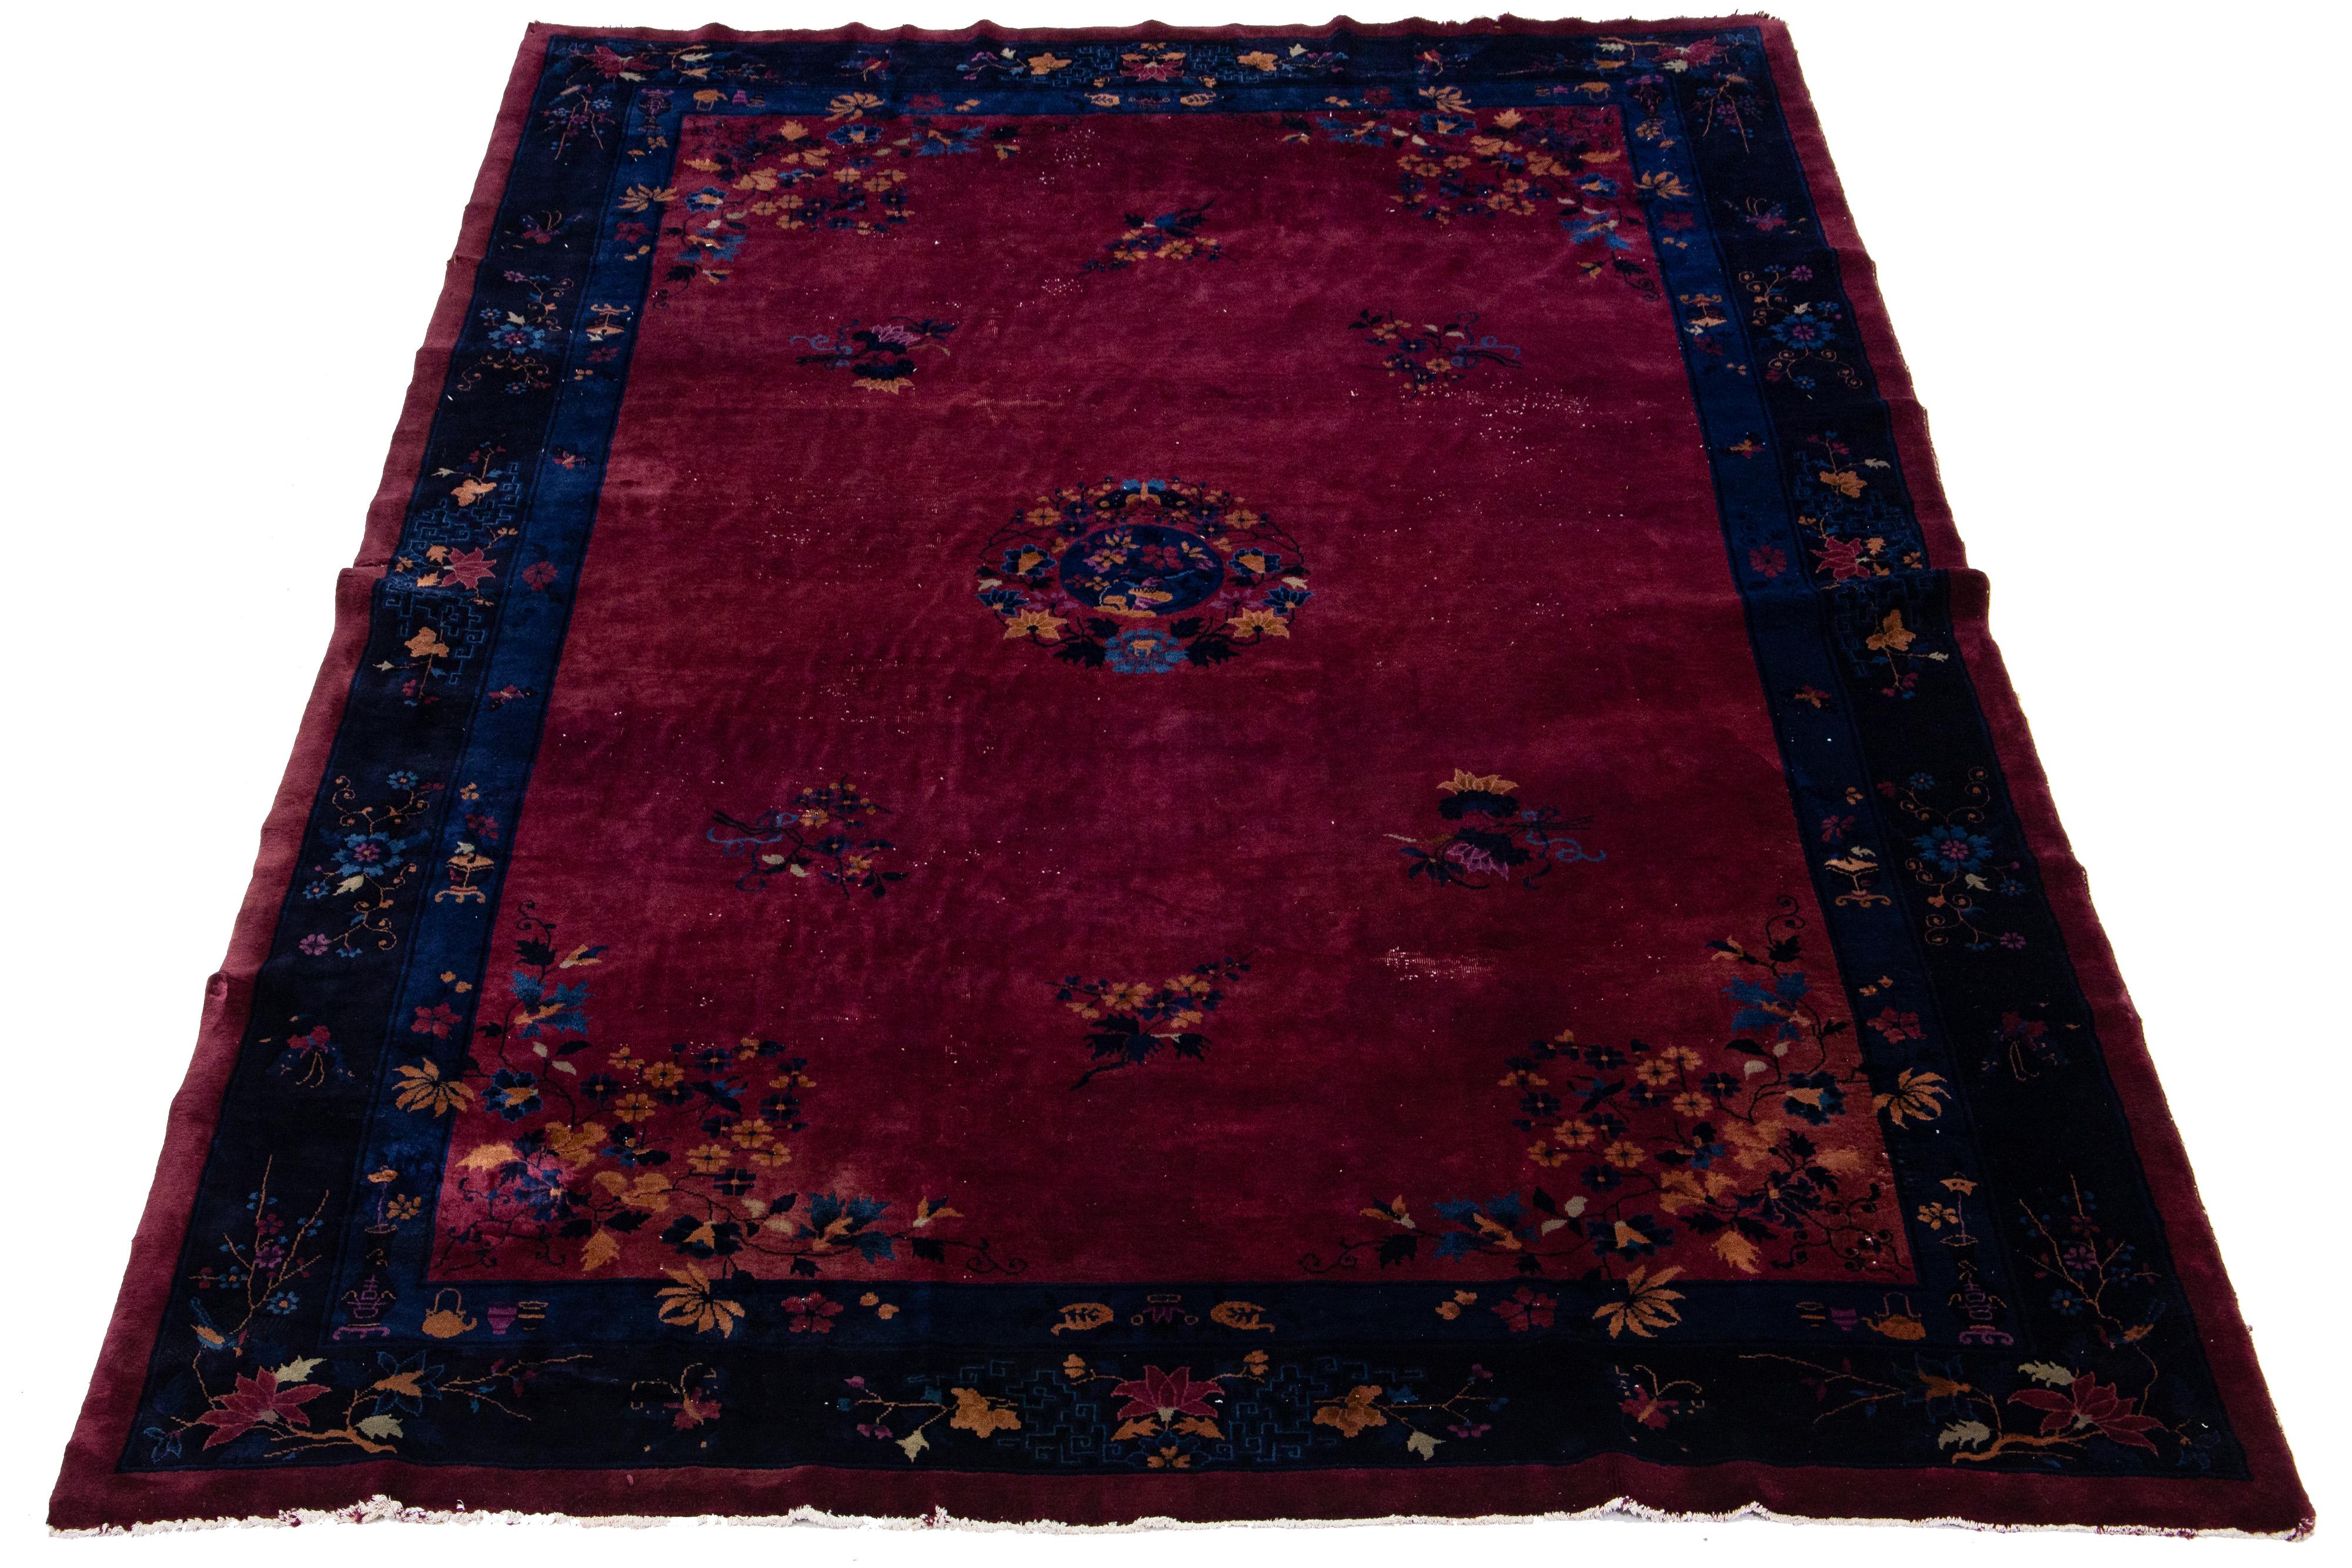 This antique Chinese Art Deco rug is hand-knotted with wool and features a burgundy red field with a navy blue multicolor floral design. The classic Chinese floral pattern is elegant and sophisticated.

This rug measures 9'11